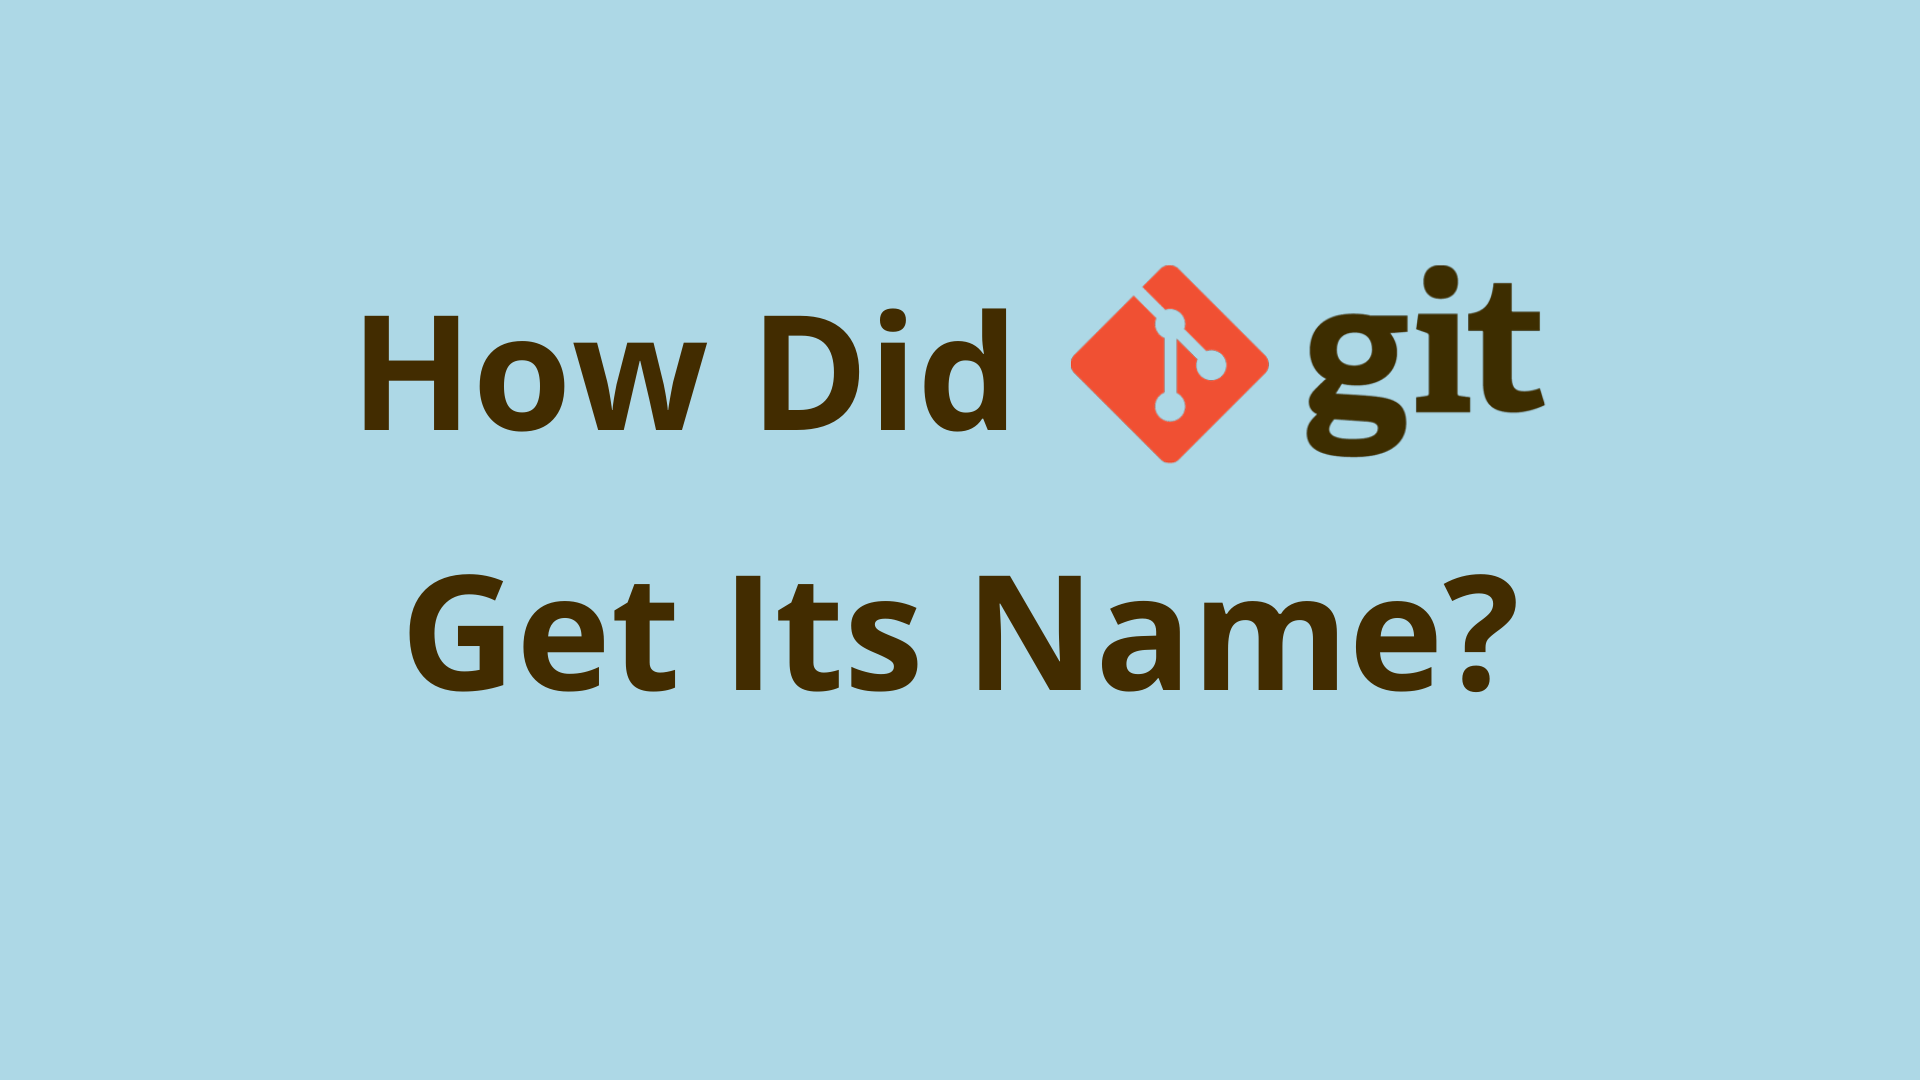 Image of How did Git get its name?